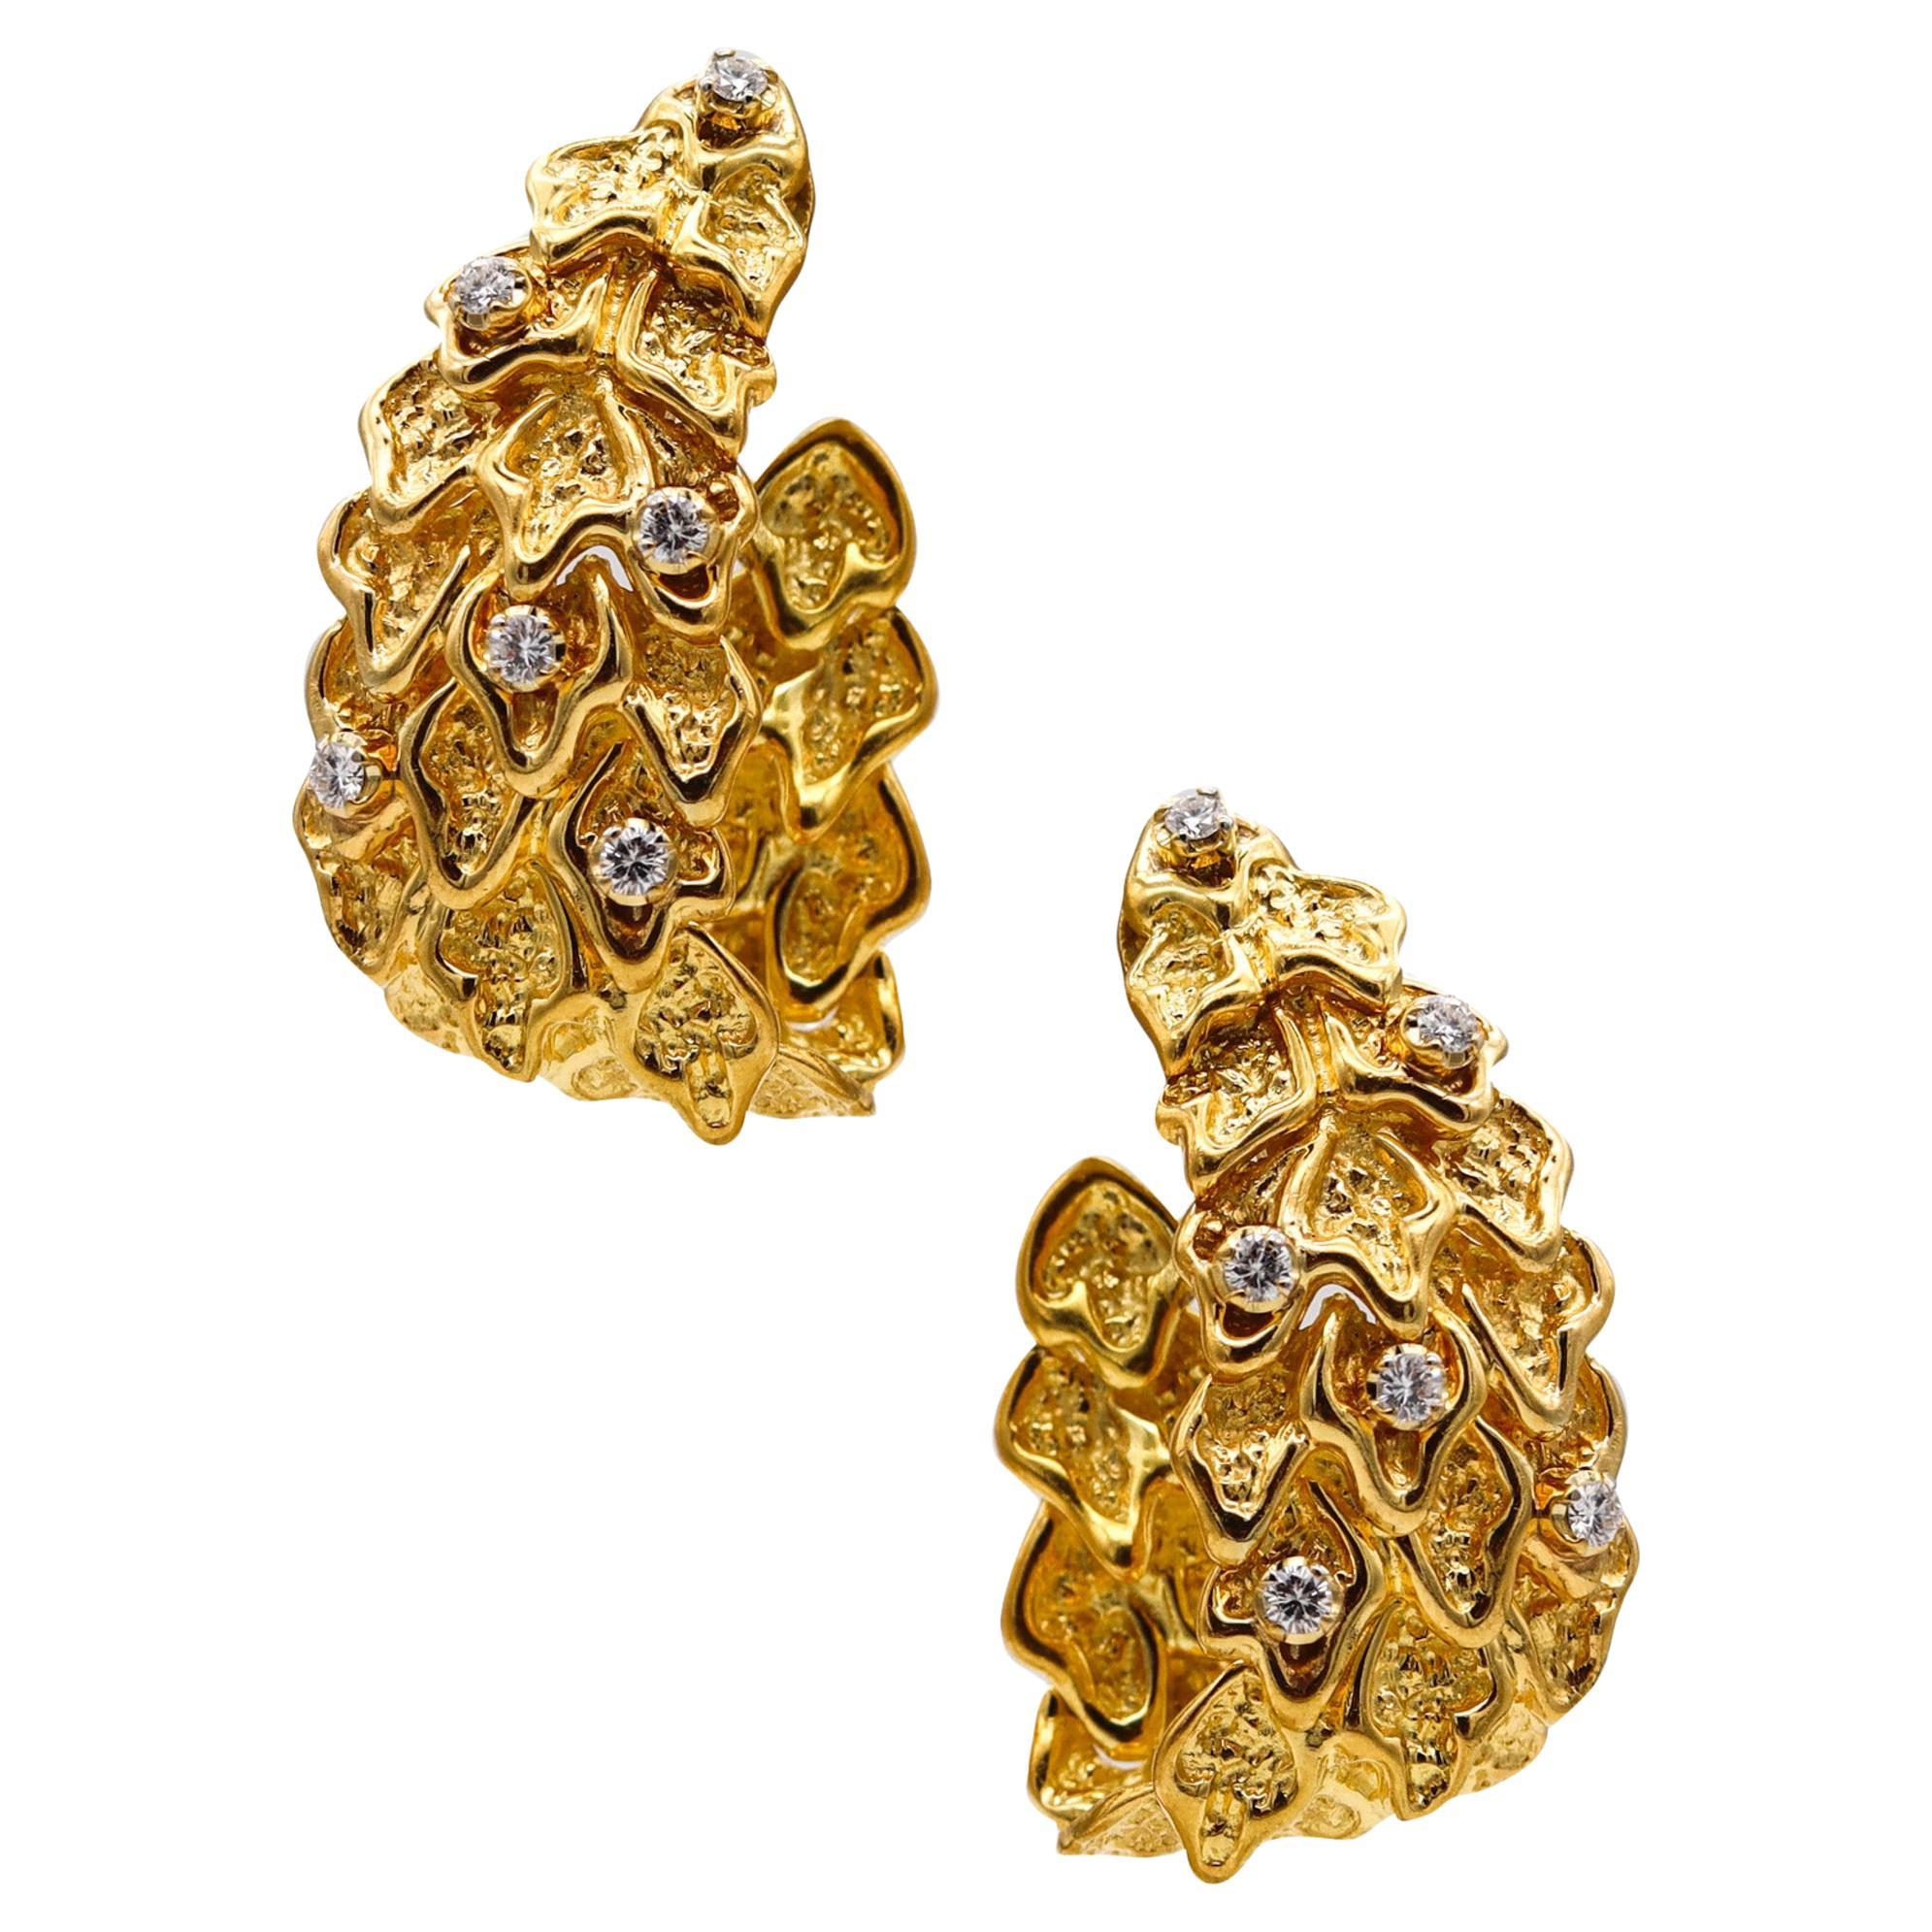 Fratelli Gaspari Retro Modern Hoops In 18Kt Gold With 2.04 Cts In Diamonds For Sale